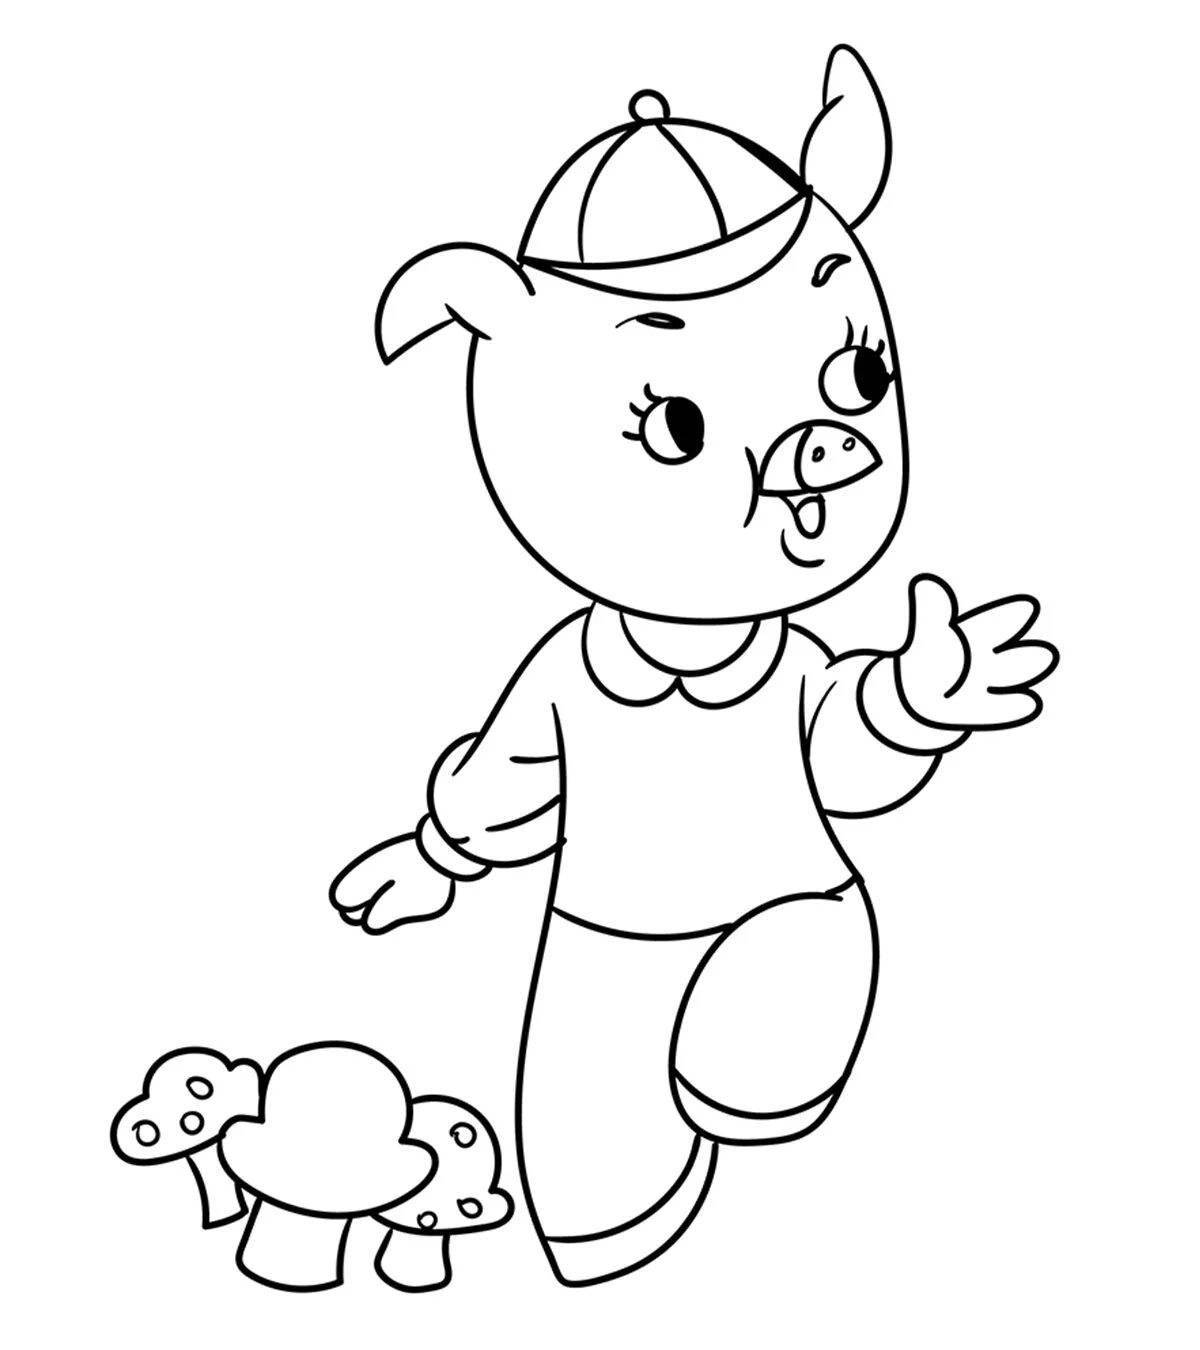 Fun coloring three little pigs for children 4-5 years old